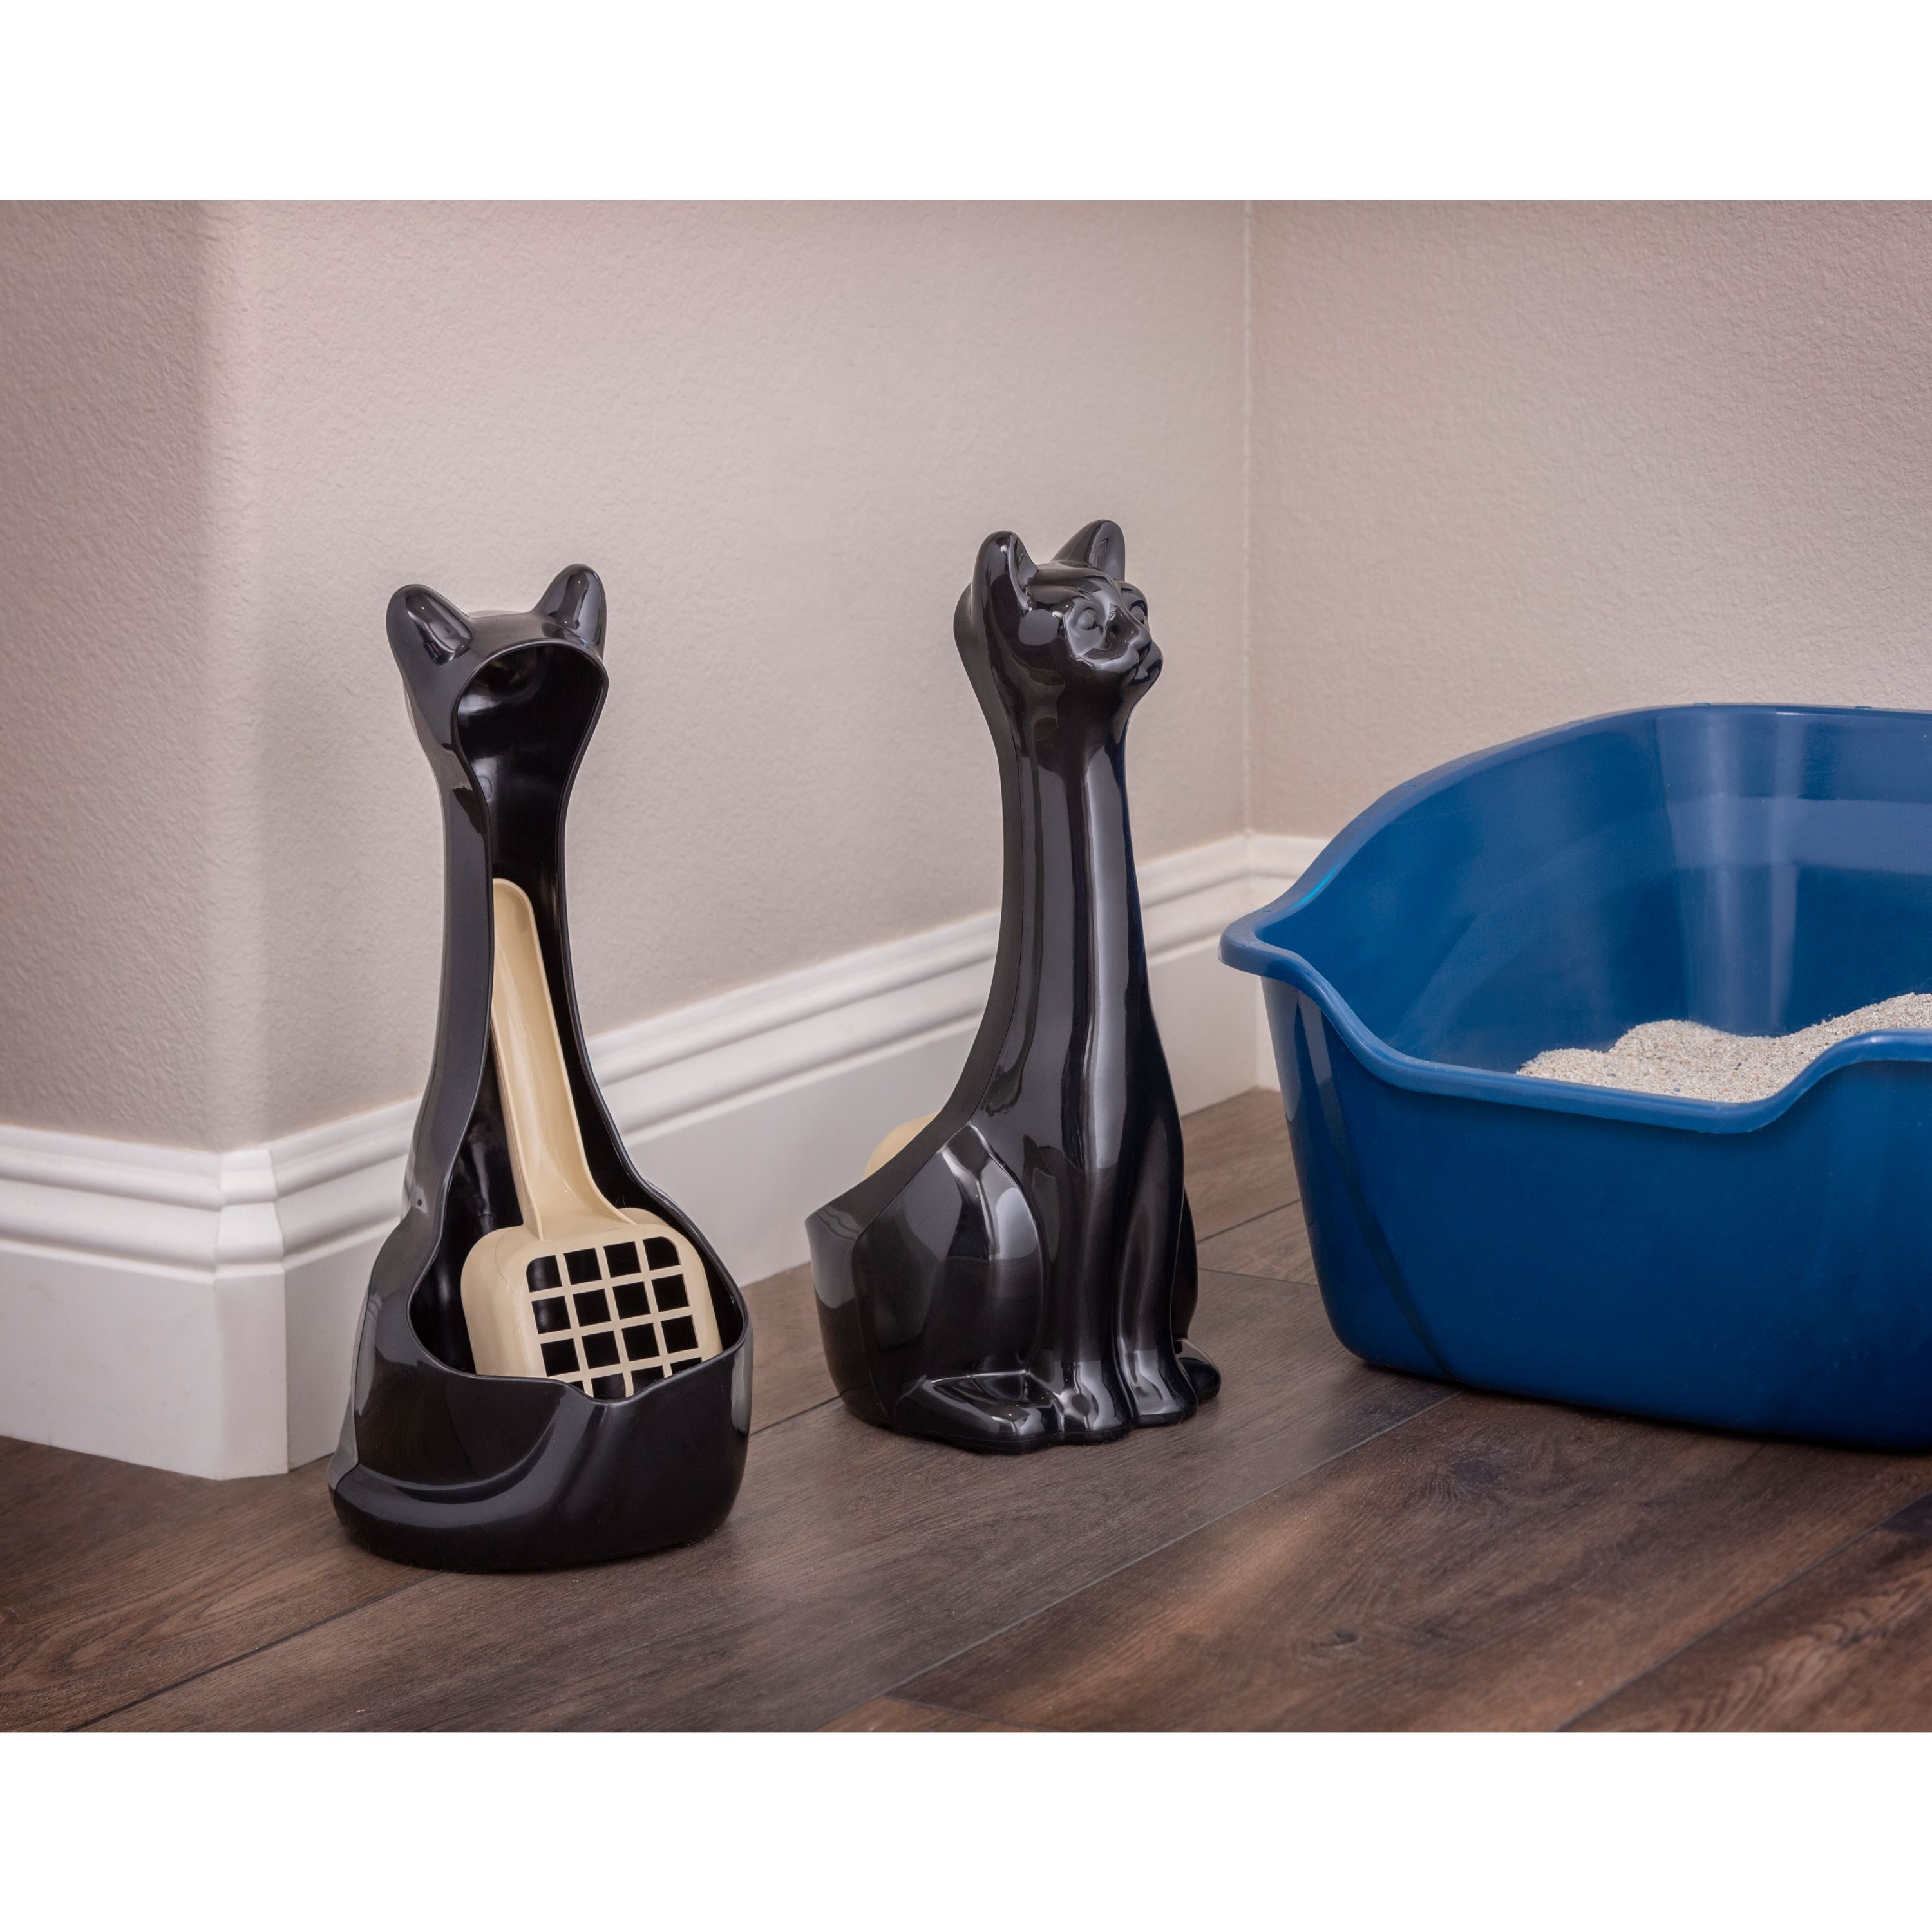 New Age Pet Black Litter Box Concealment with Scoop Holder – 7-in x 7-in x 6.5-in – Easy Cleaning, Stylish Design